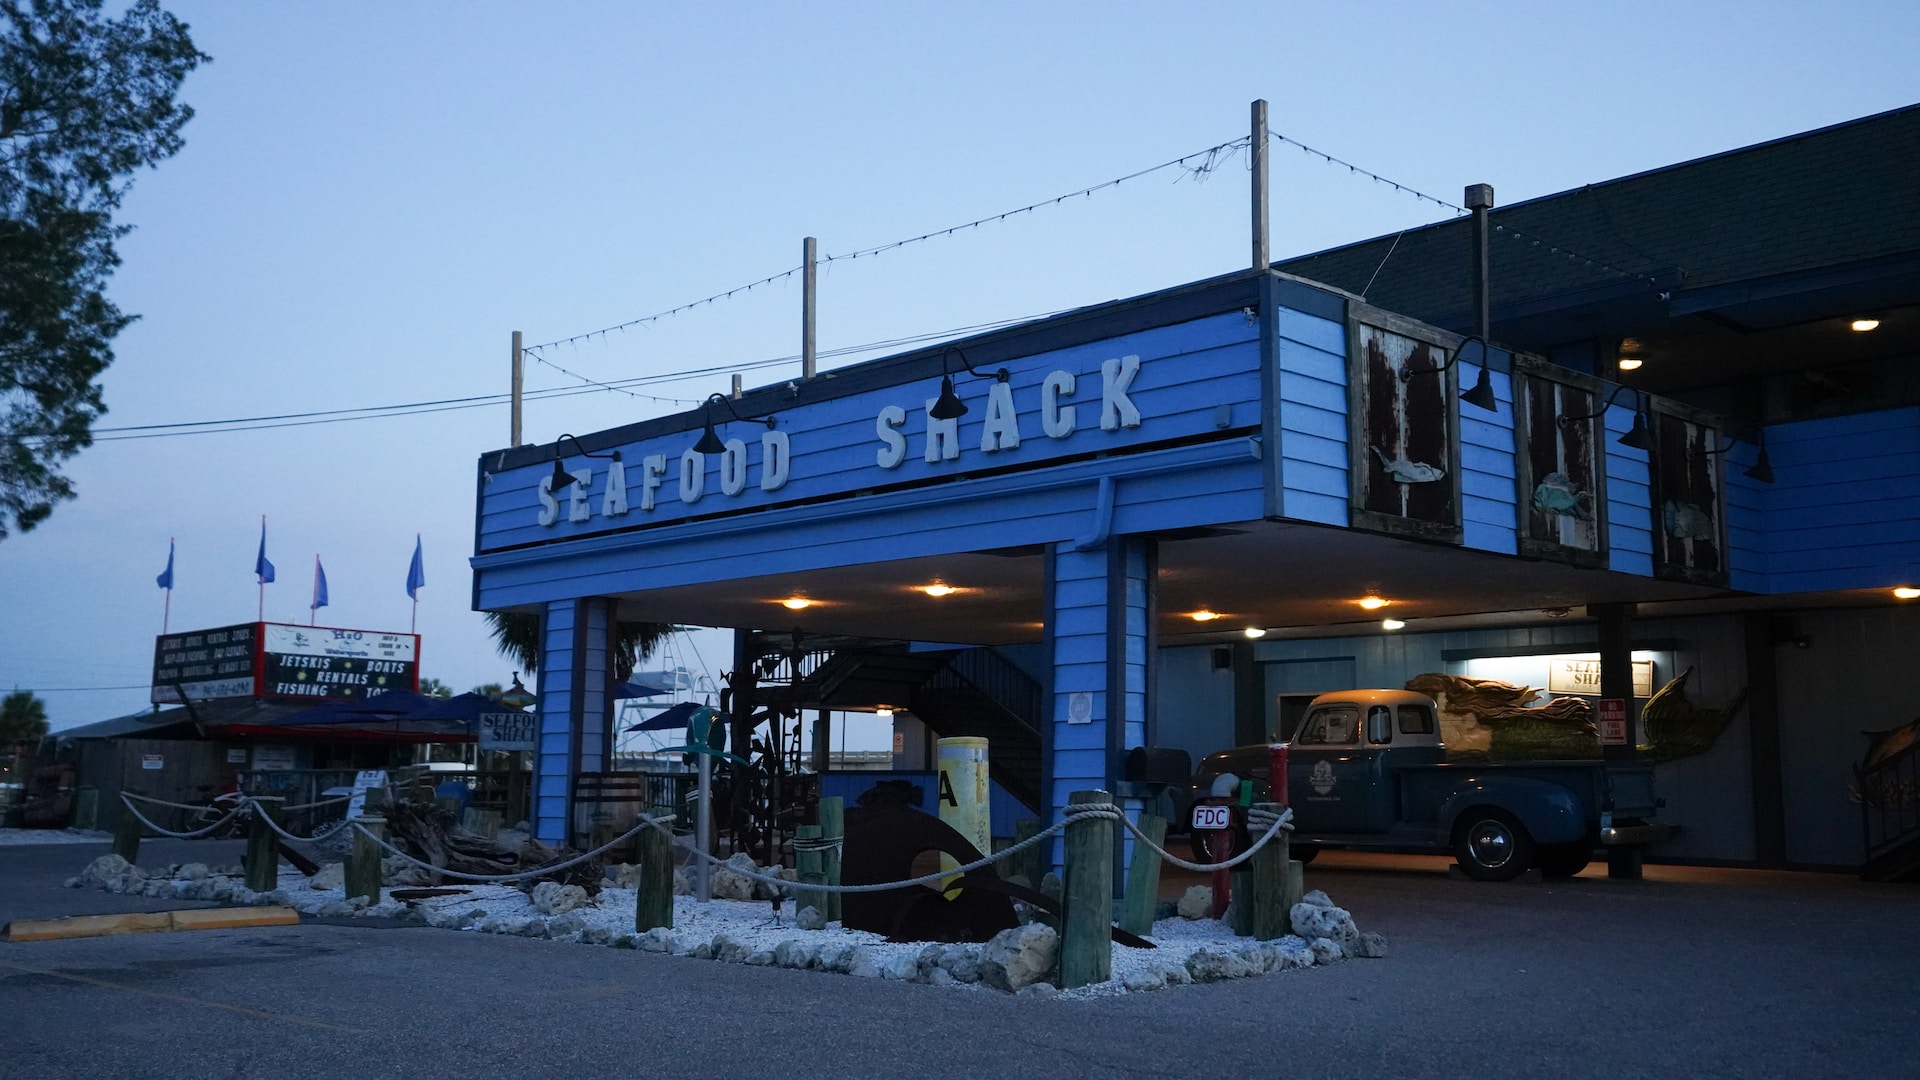 blue building of Seafood Shack restaurant in Anna Maria Island